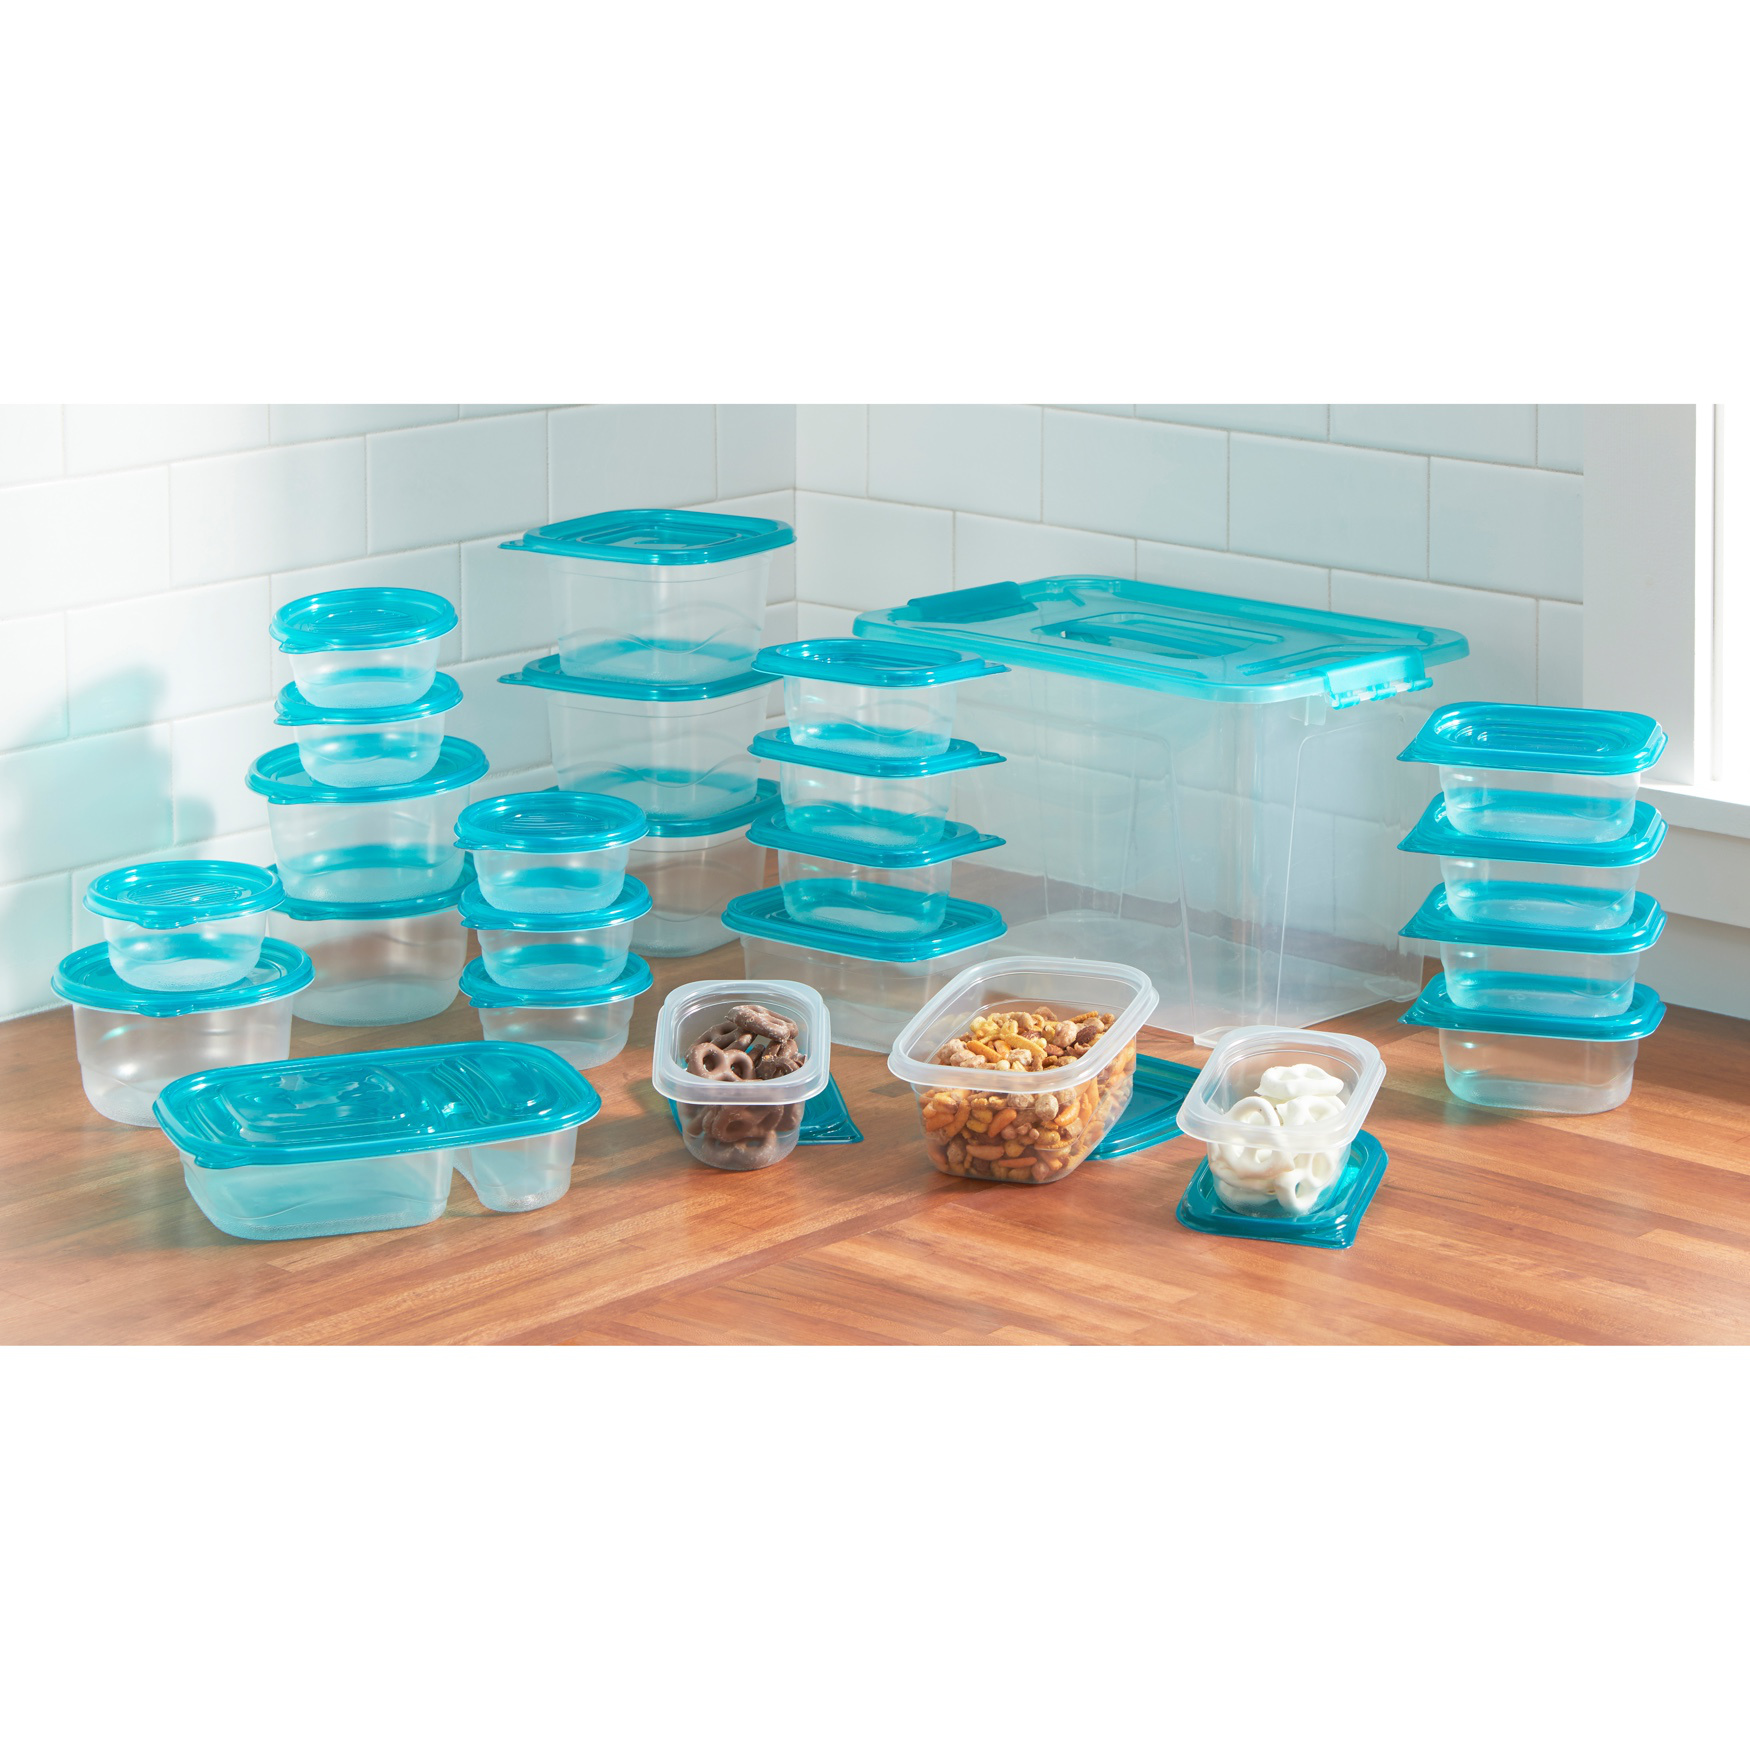 50-PC. Food Storage Container Set, GREEN